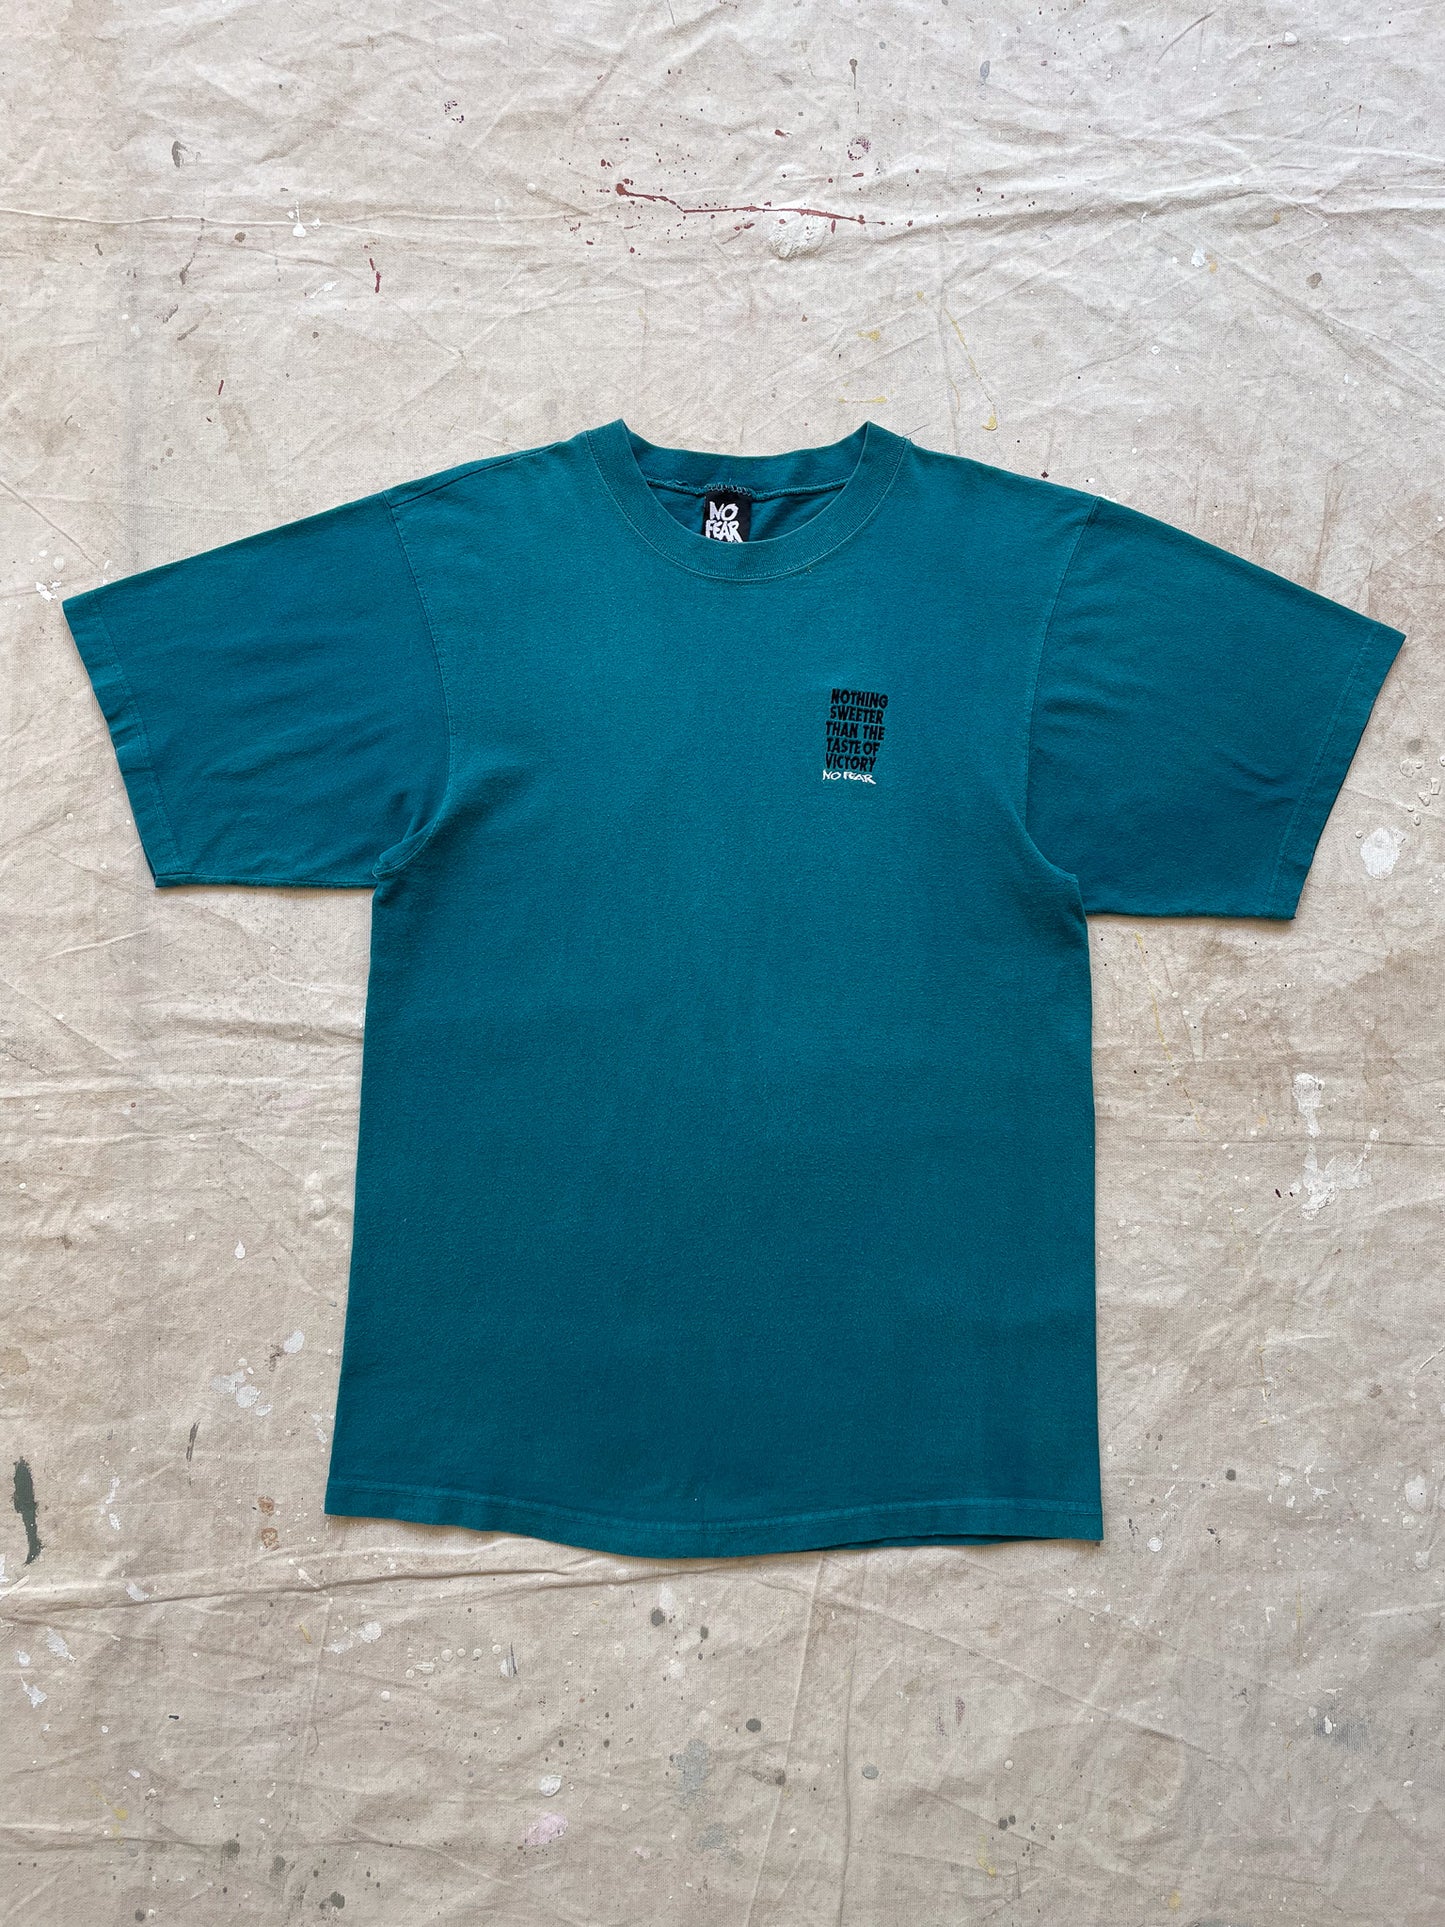 NO FEAR EMBROIDERED T-SHIRT—[M]